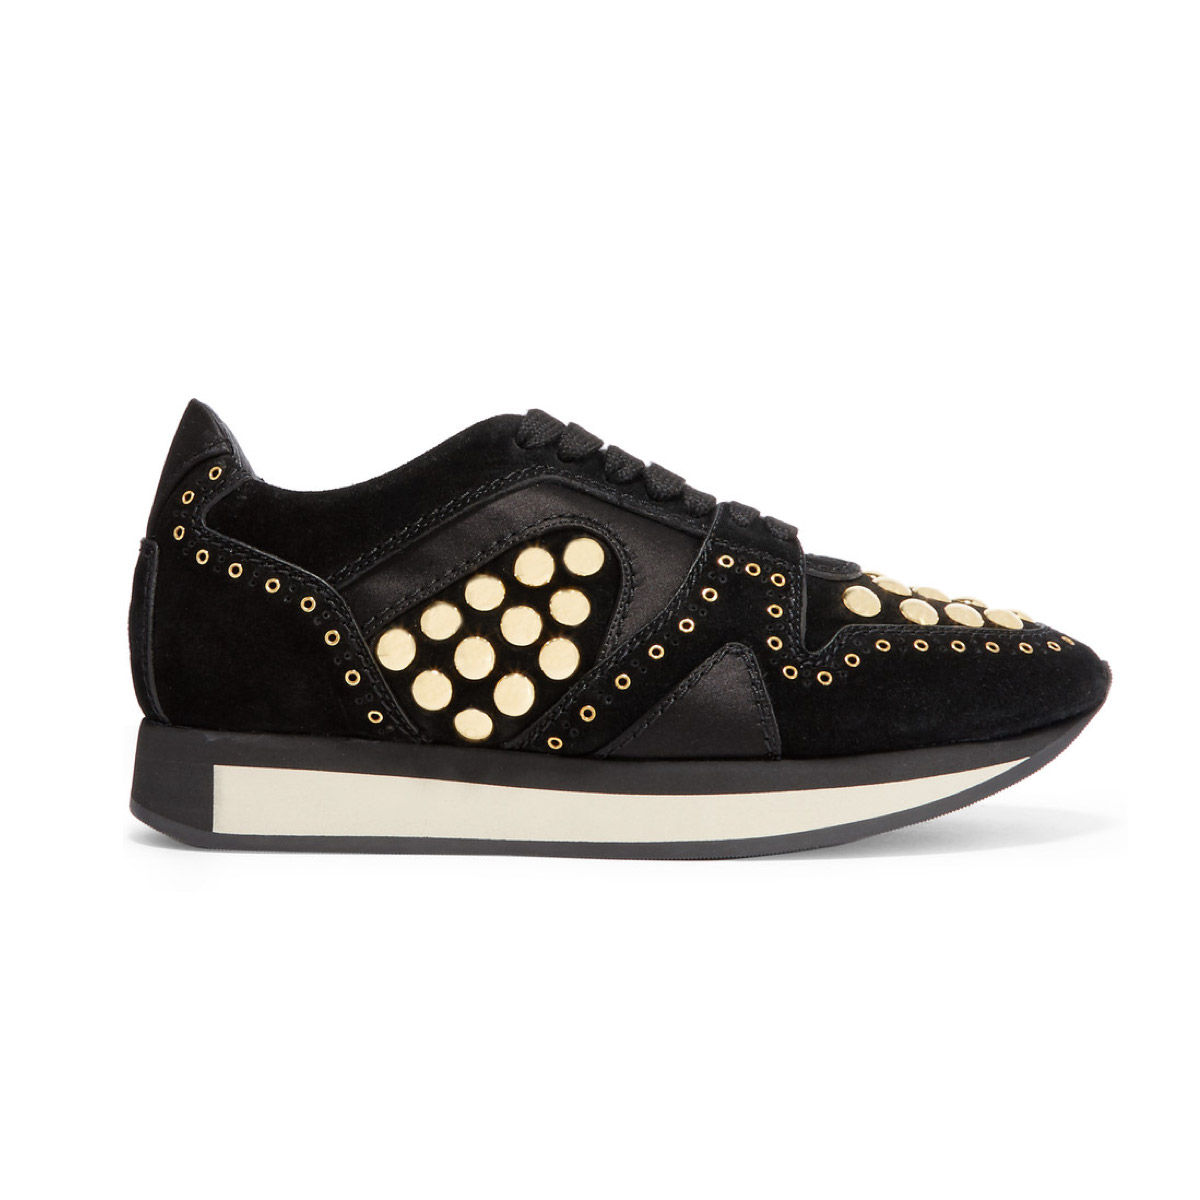 Studded Suede Sneakers